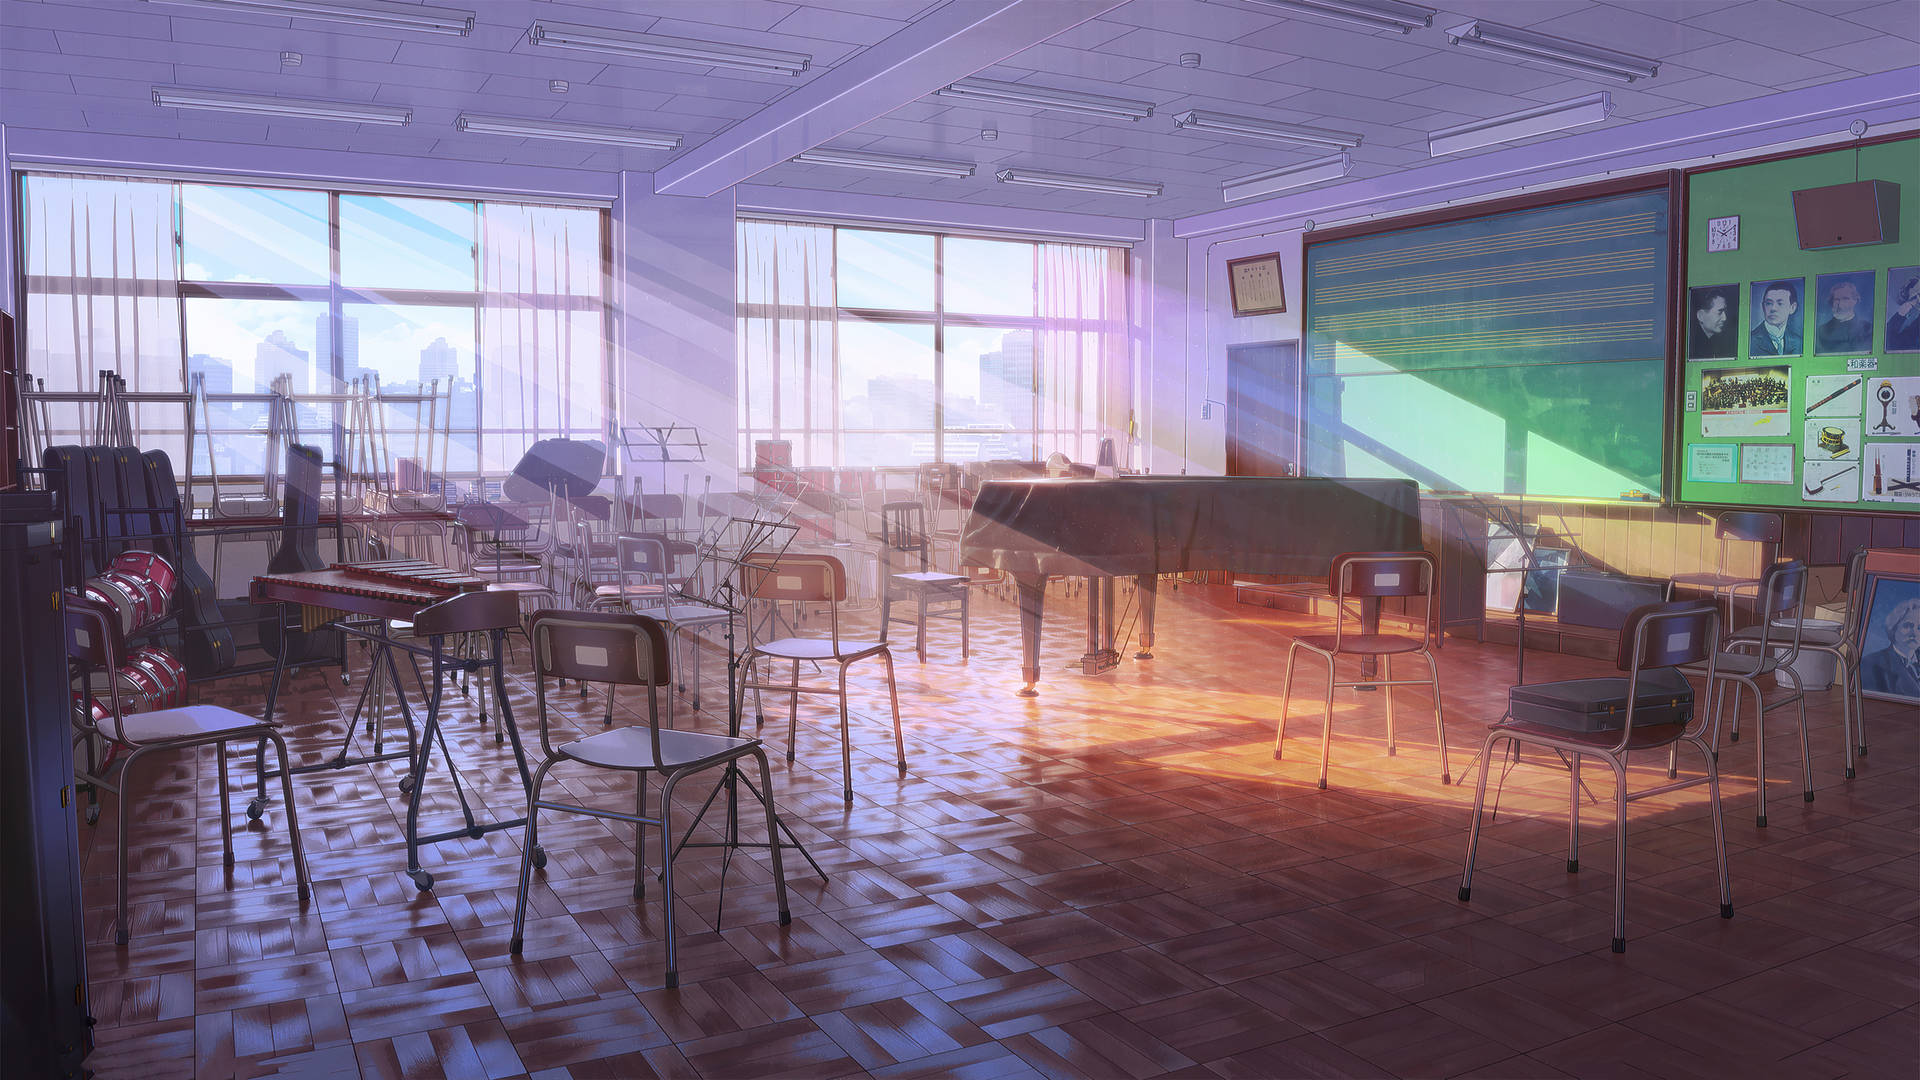 Chairs Askew Anime Classroom Wallpaper